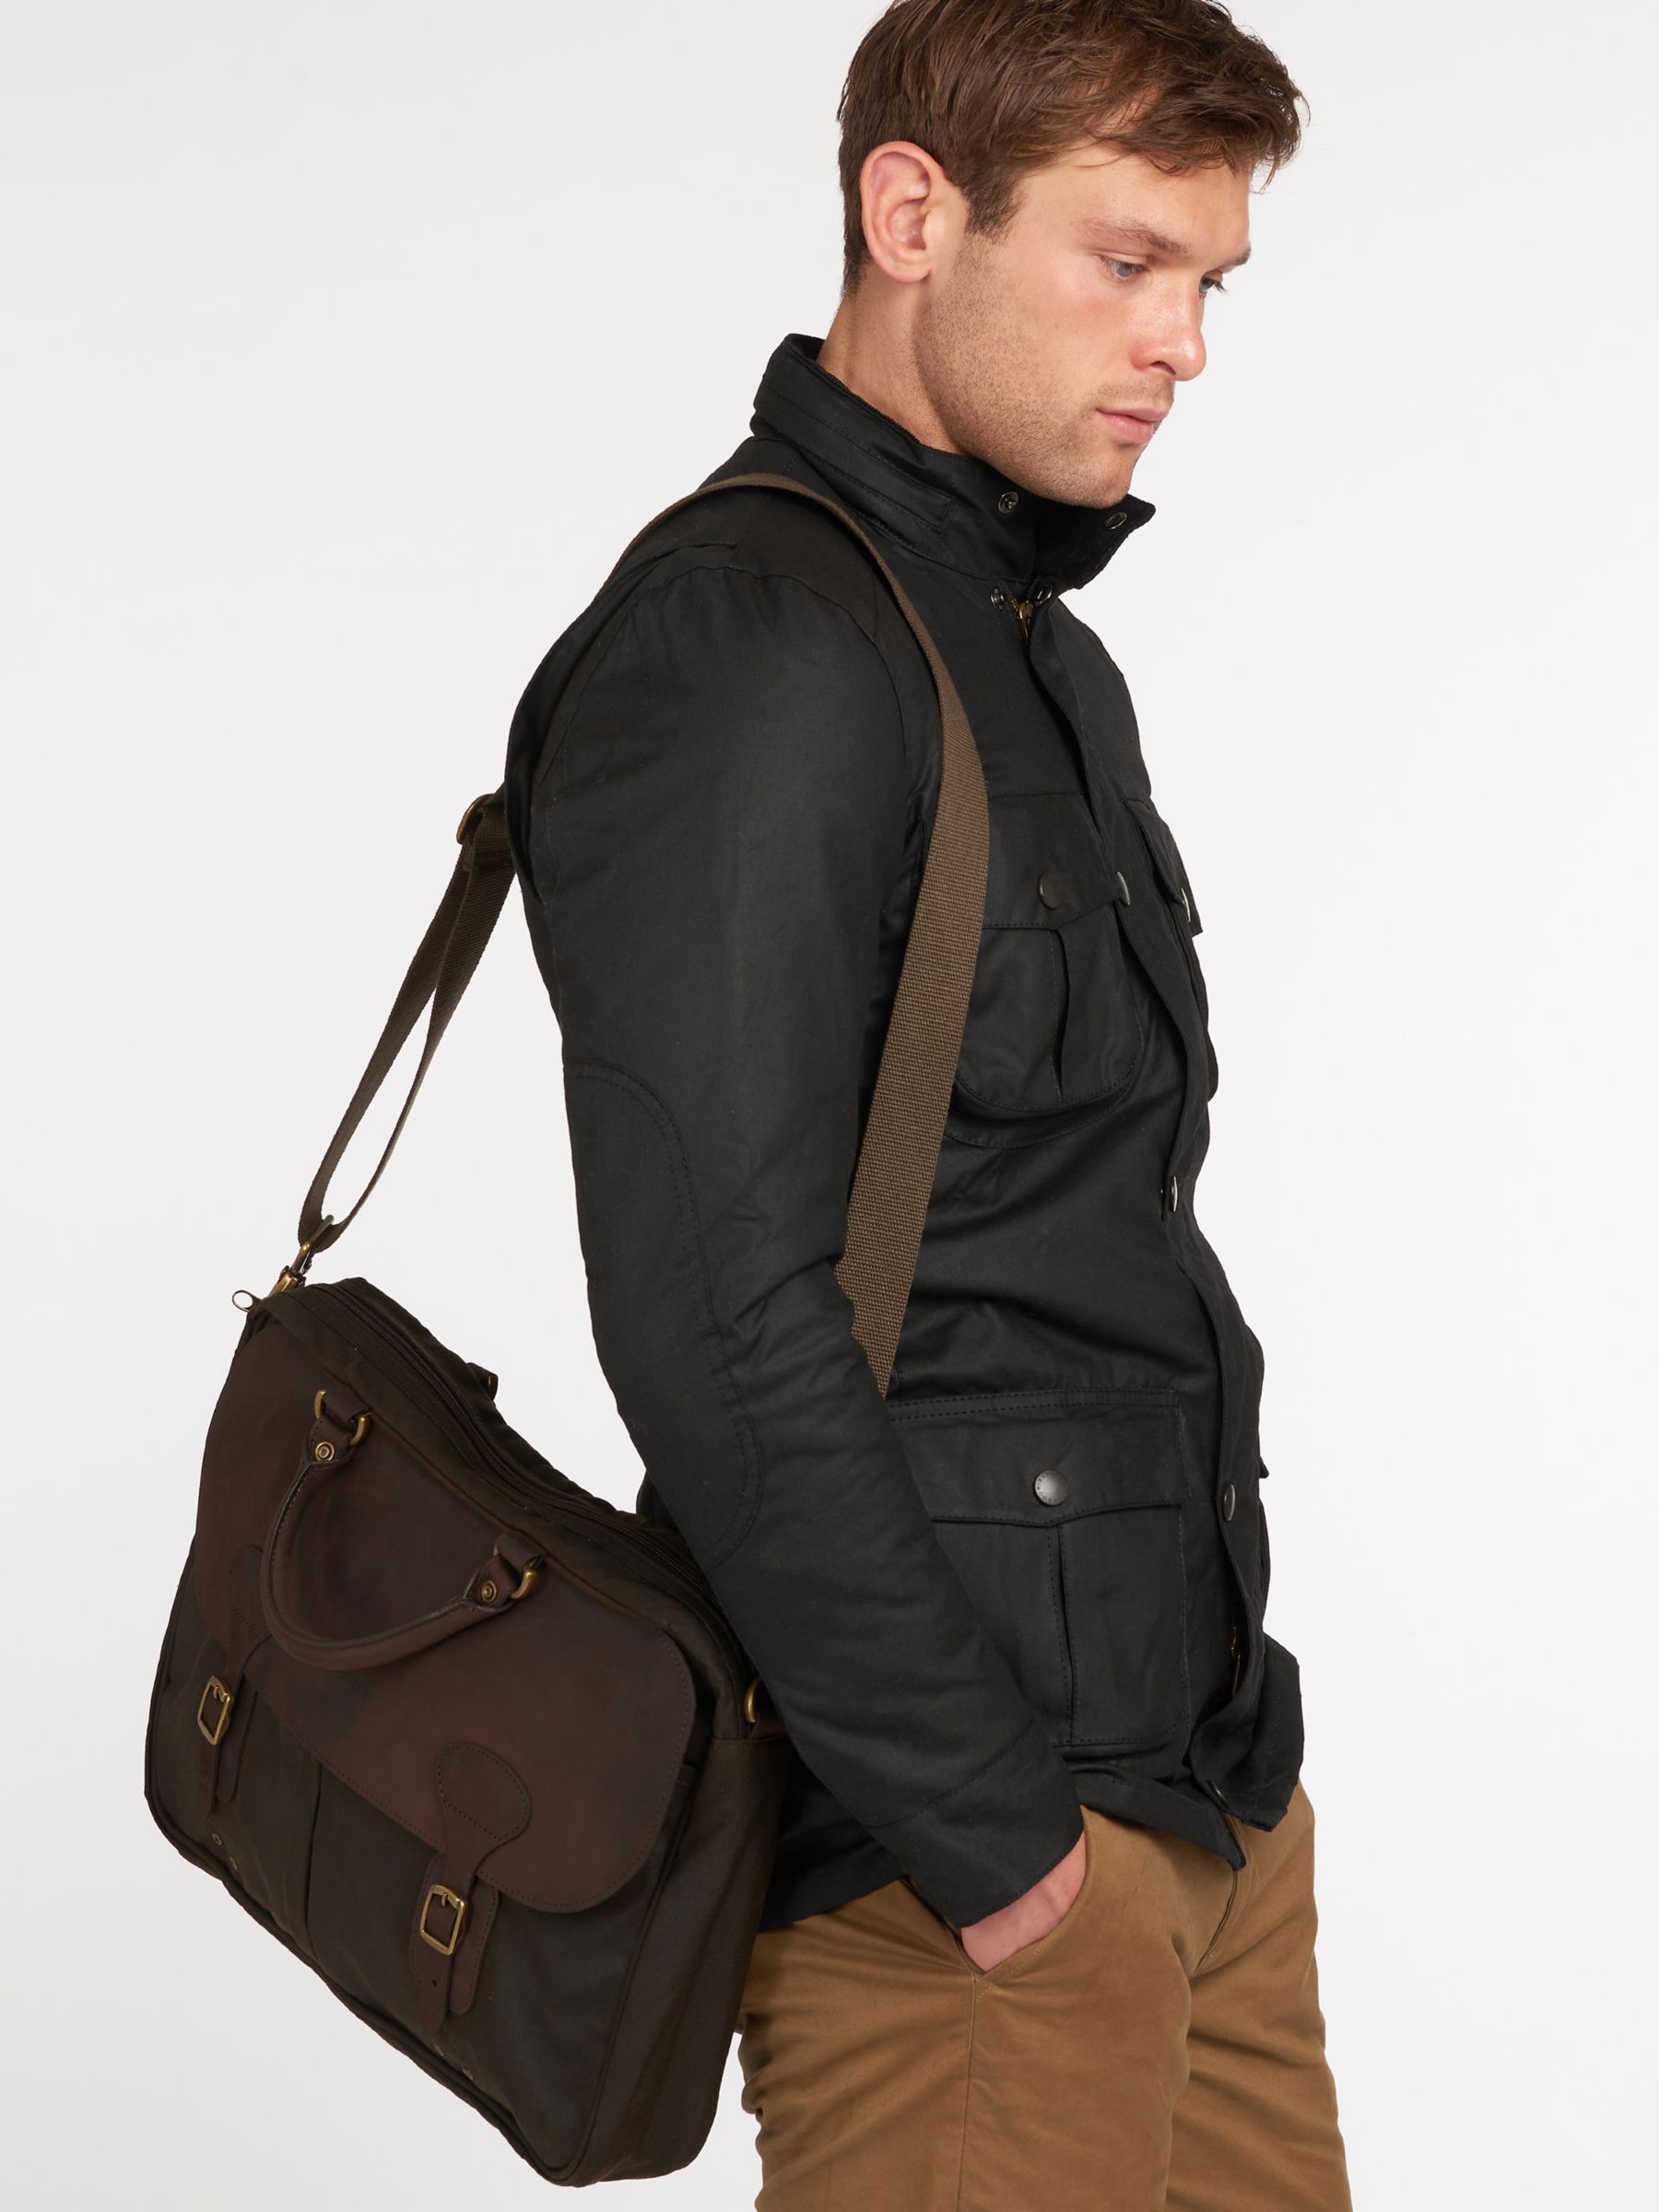 Barbour Wax Cotton and Leather Trim Satchel, Olive at John Lewis & Partners